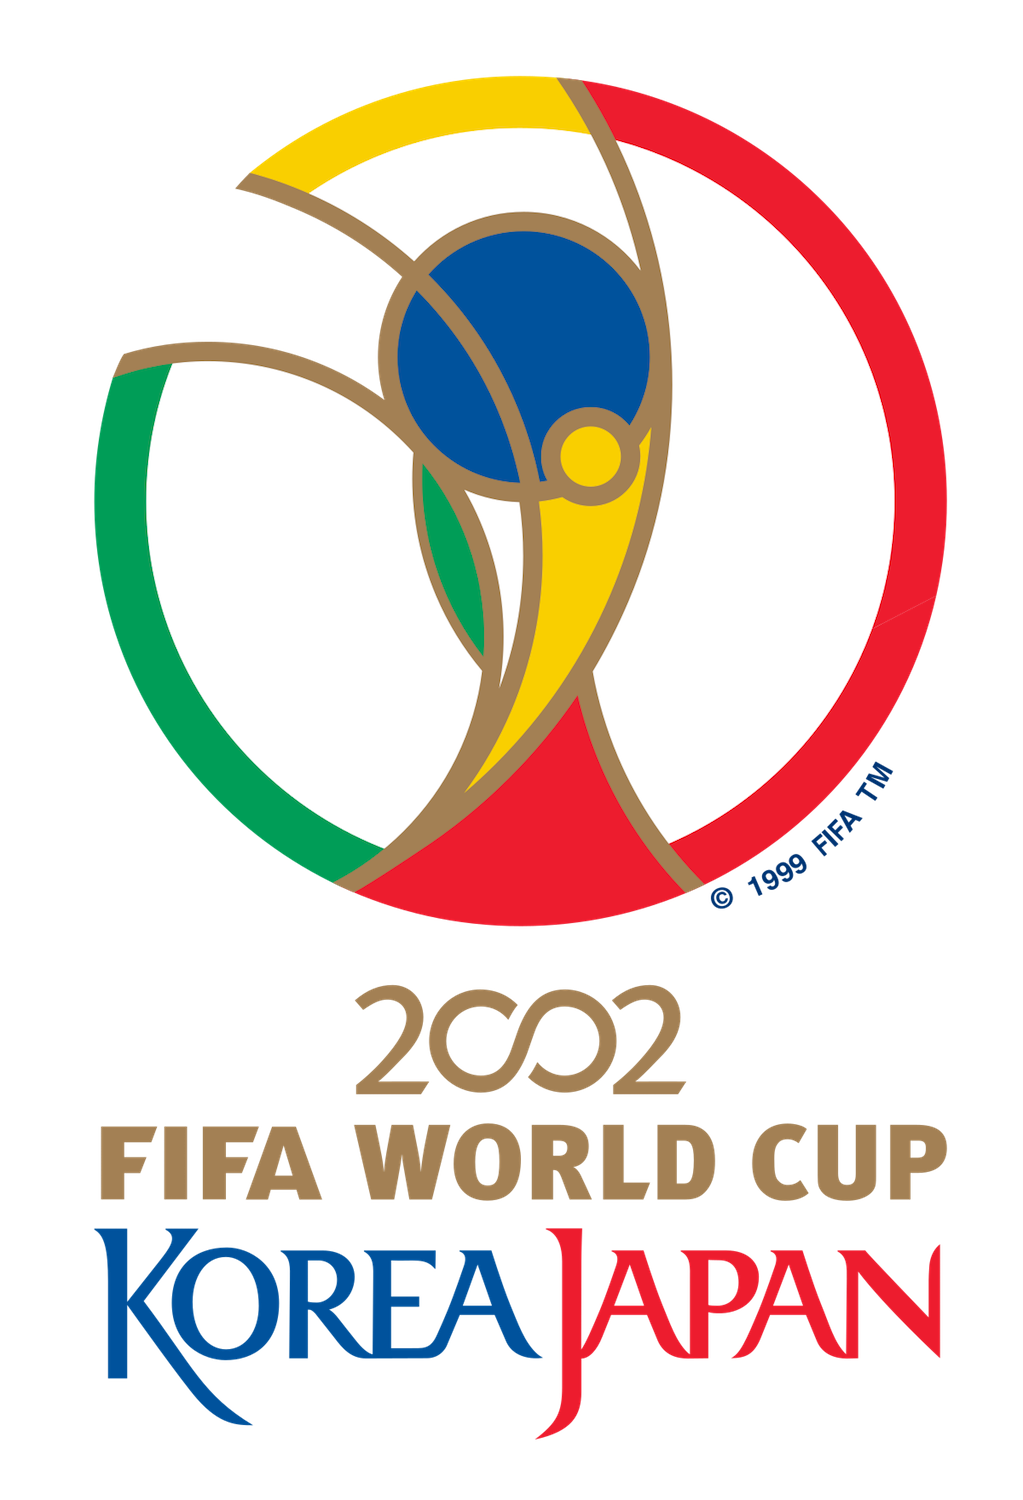 Brand New: New Logo for 2018 FIFA World Cup Russia by Brandia Central